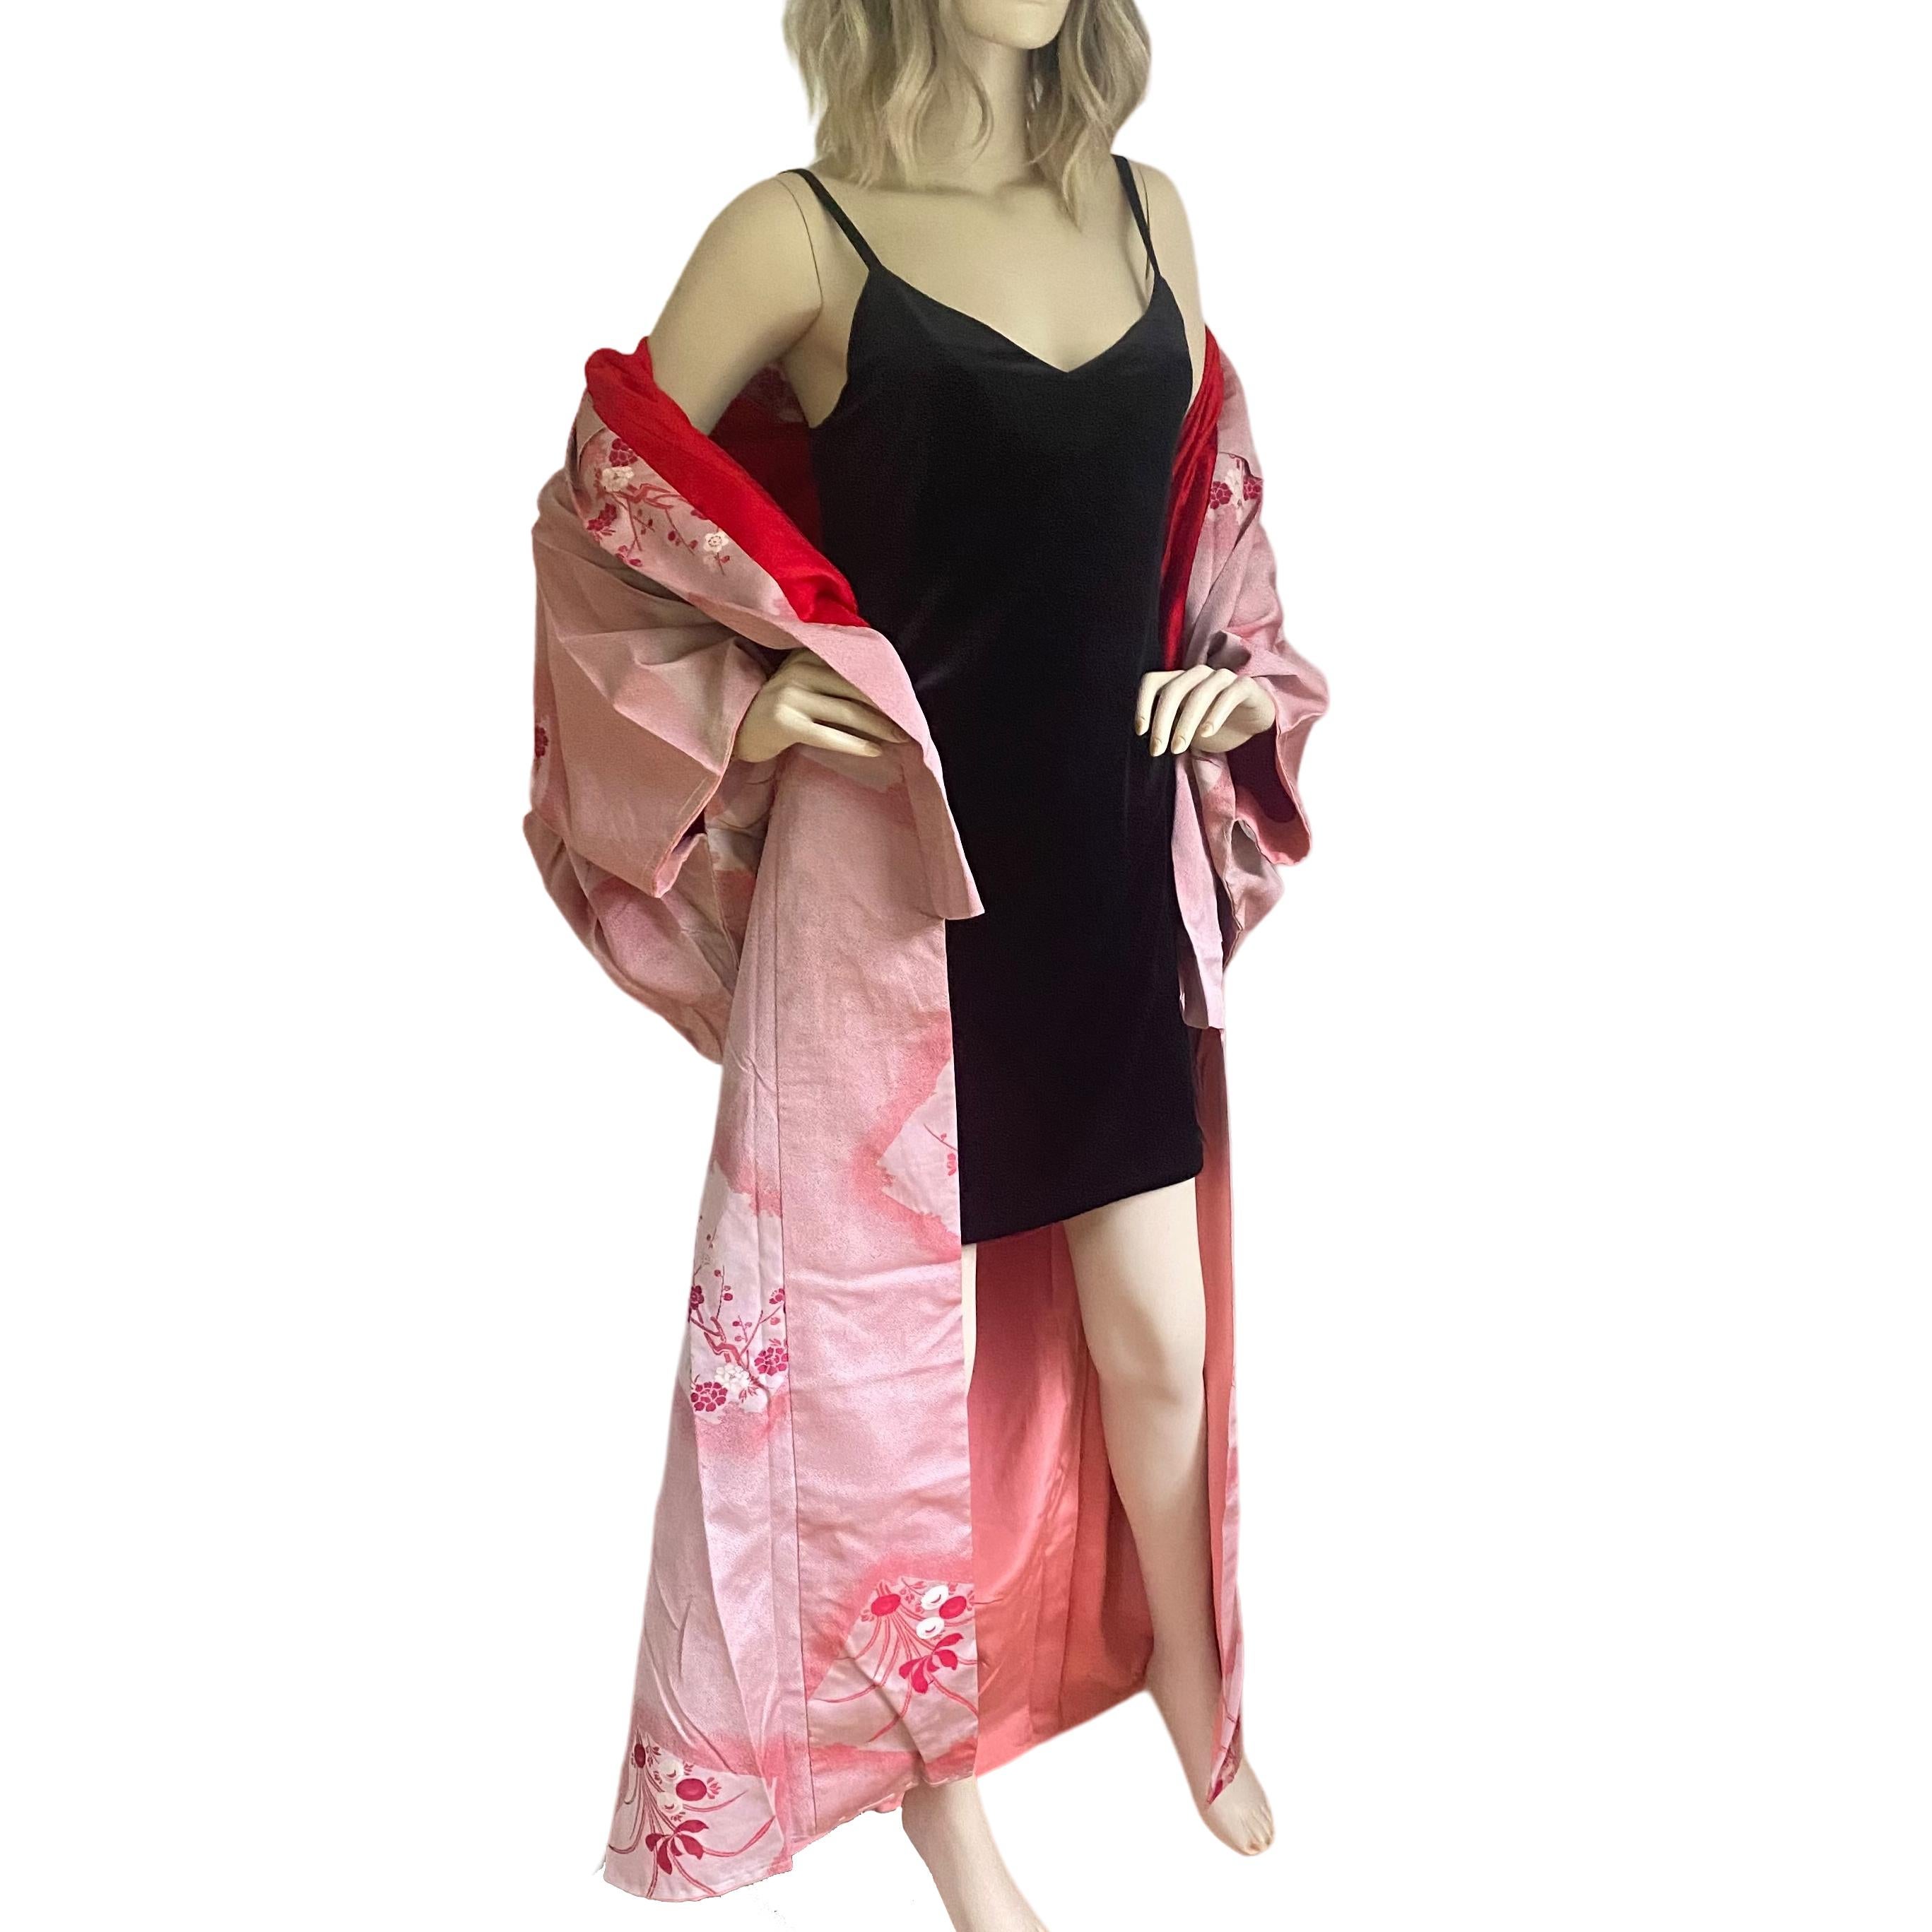 Circa: MEIJI period 1890
Place of Origin: Japan
Material: Substantial Silk brocade
Condition: excellent.
Red silk brocade kimono is hand-sewn and made in Japan.
Exquisite design of sakura (cherry blossom) branches  
Red silk lining.
Rare important